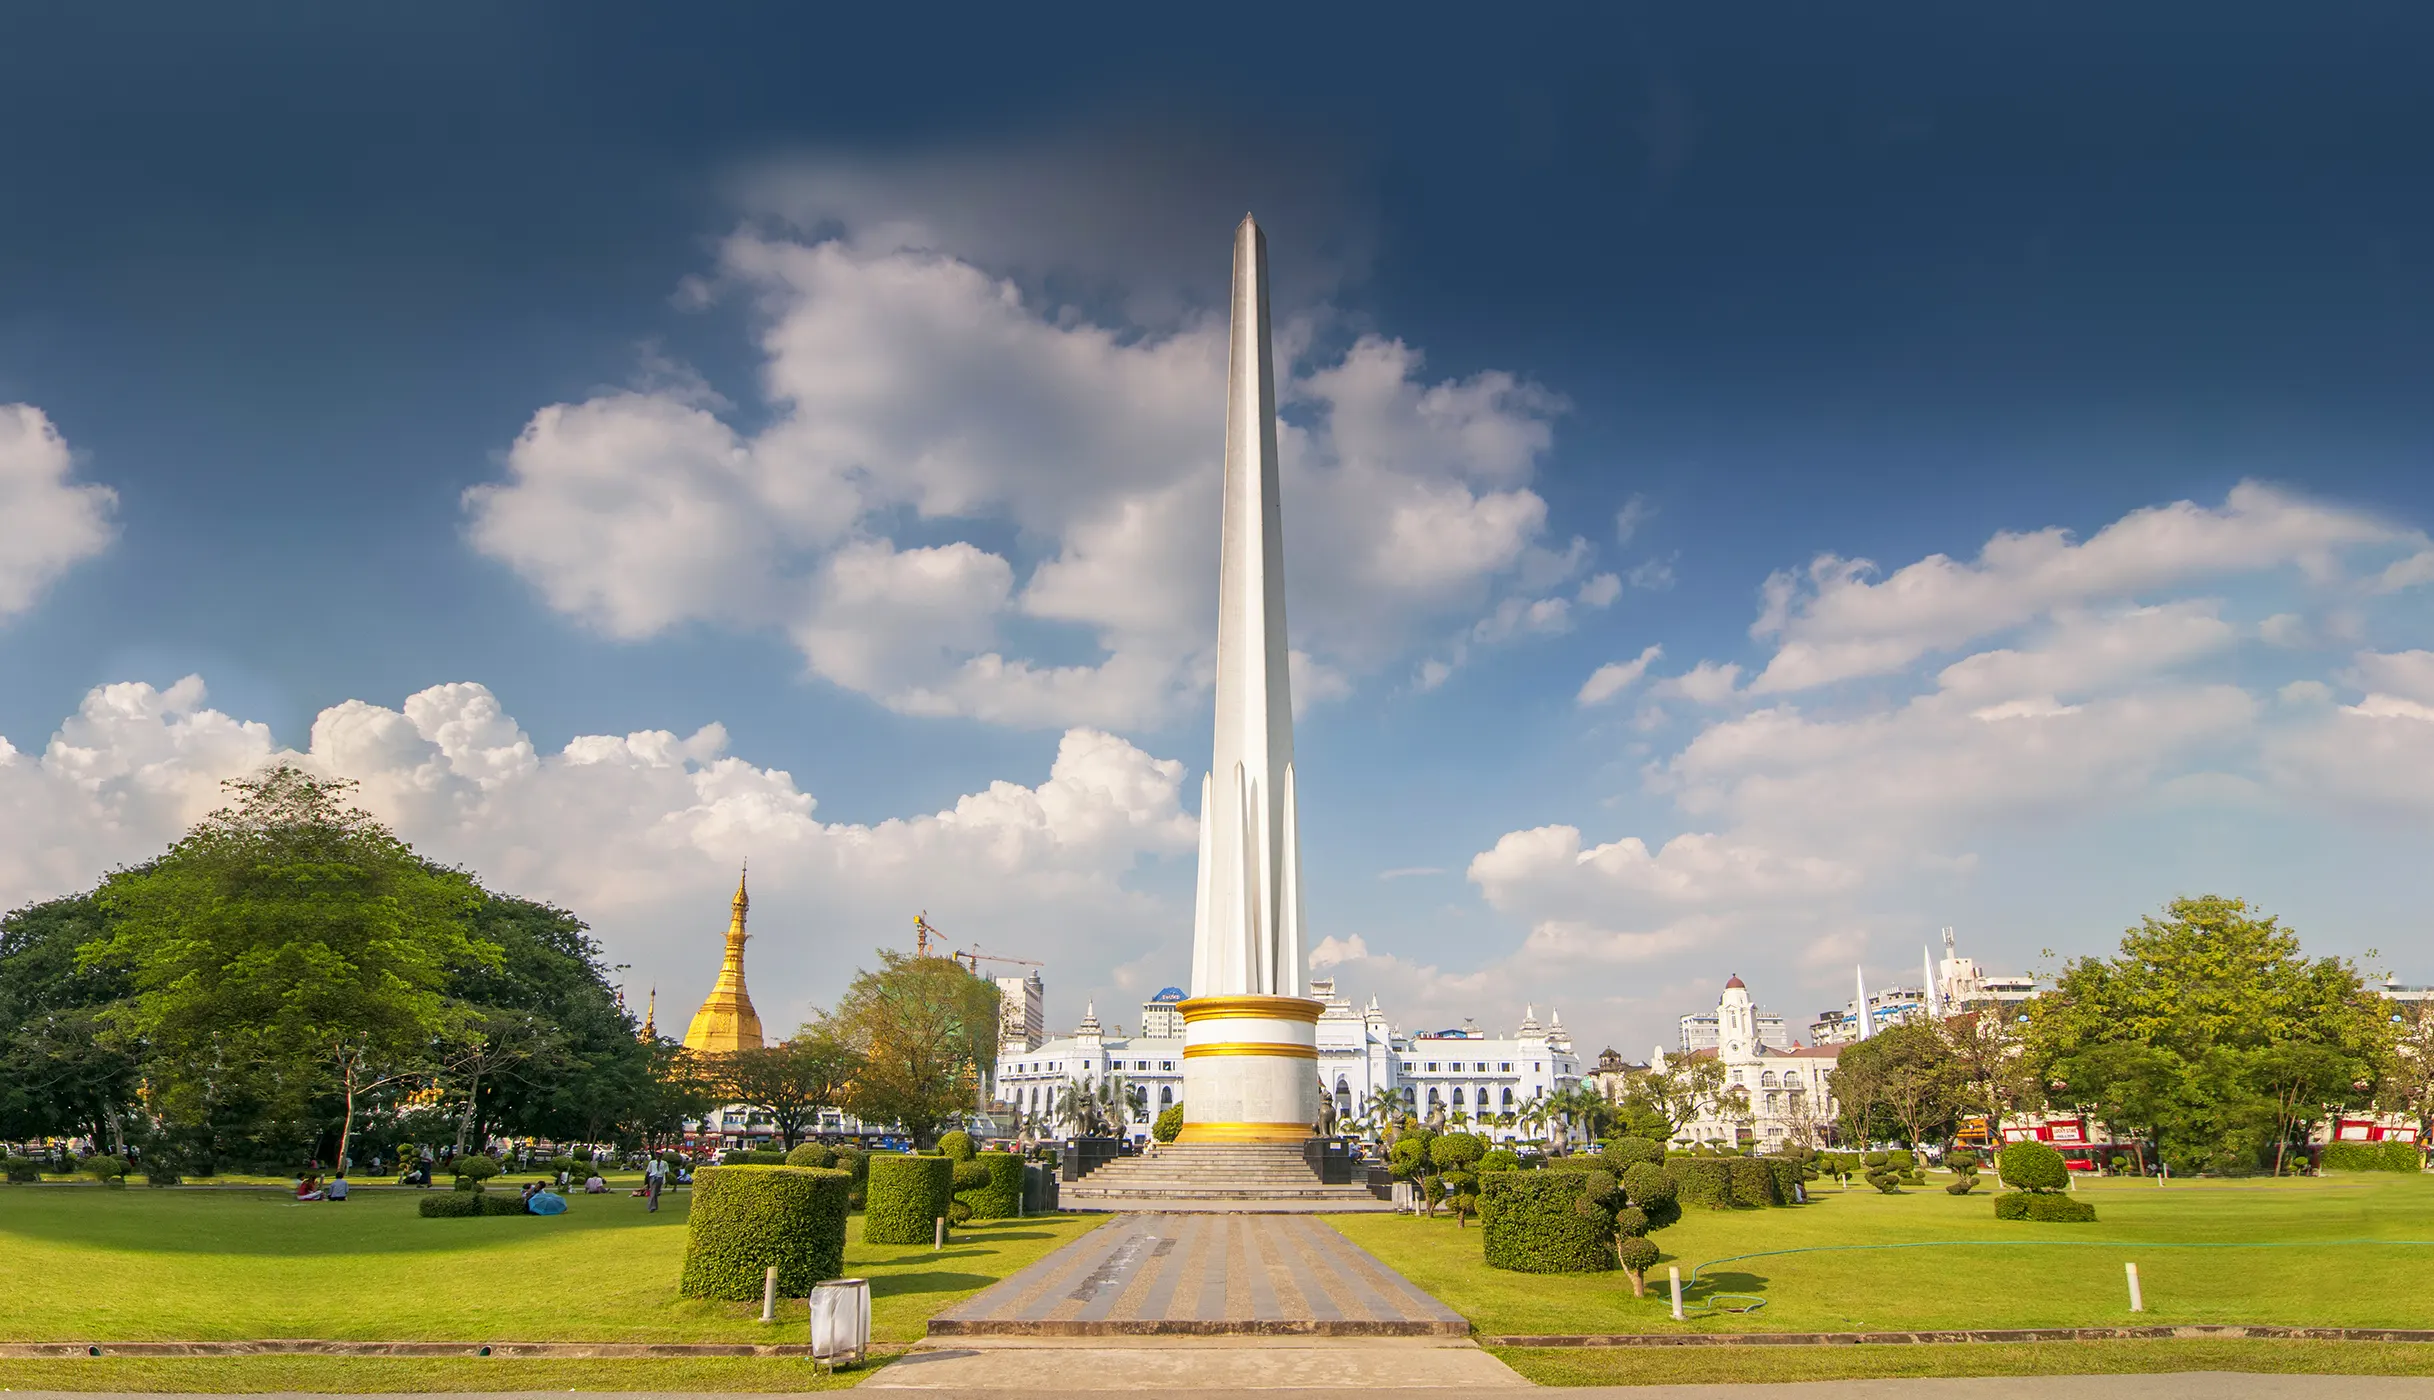 Independence Monument with City Hall & Sule Pagoda